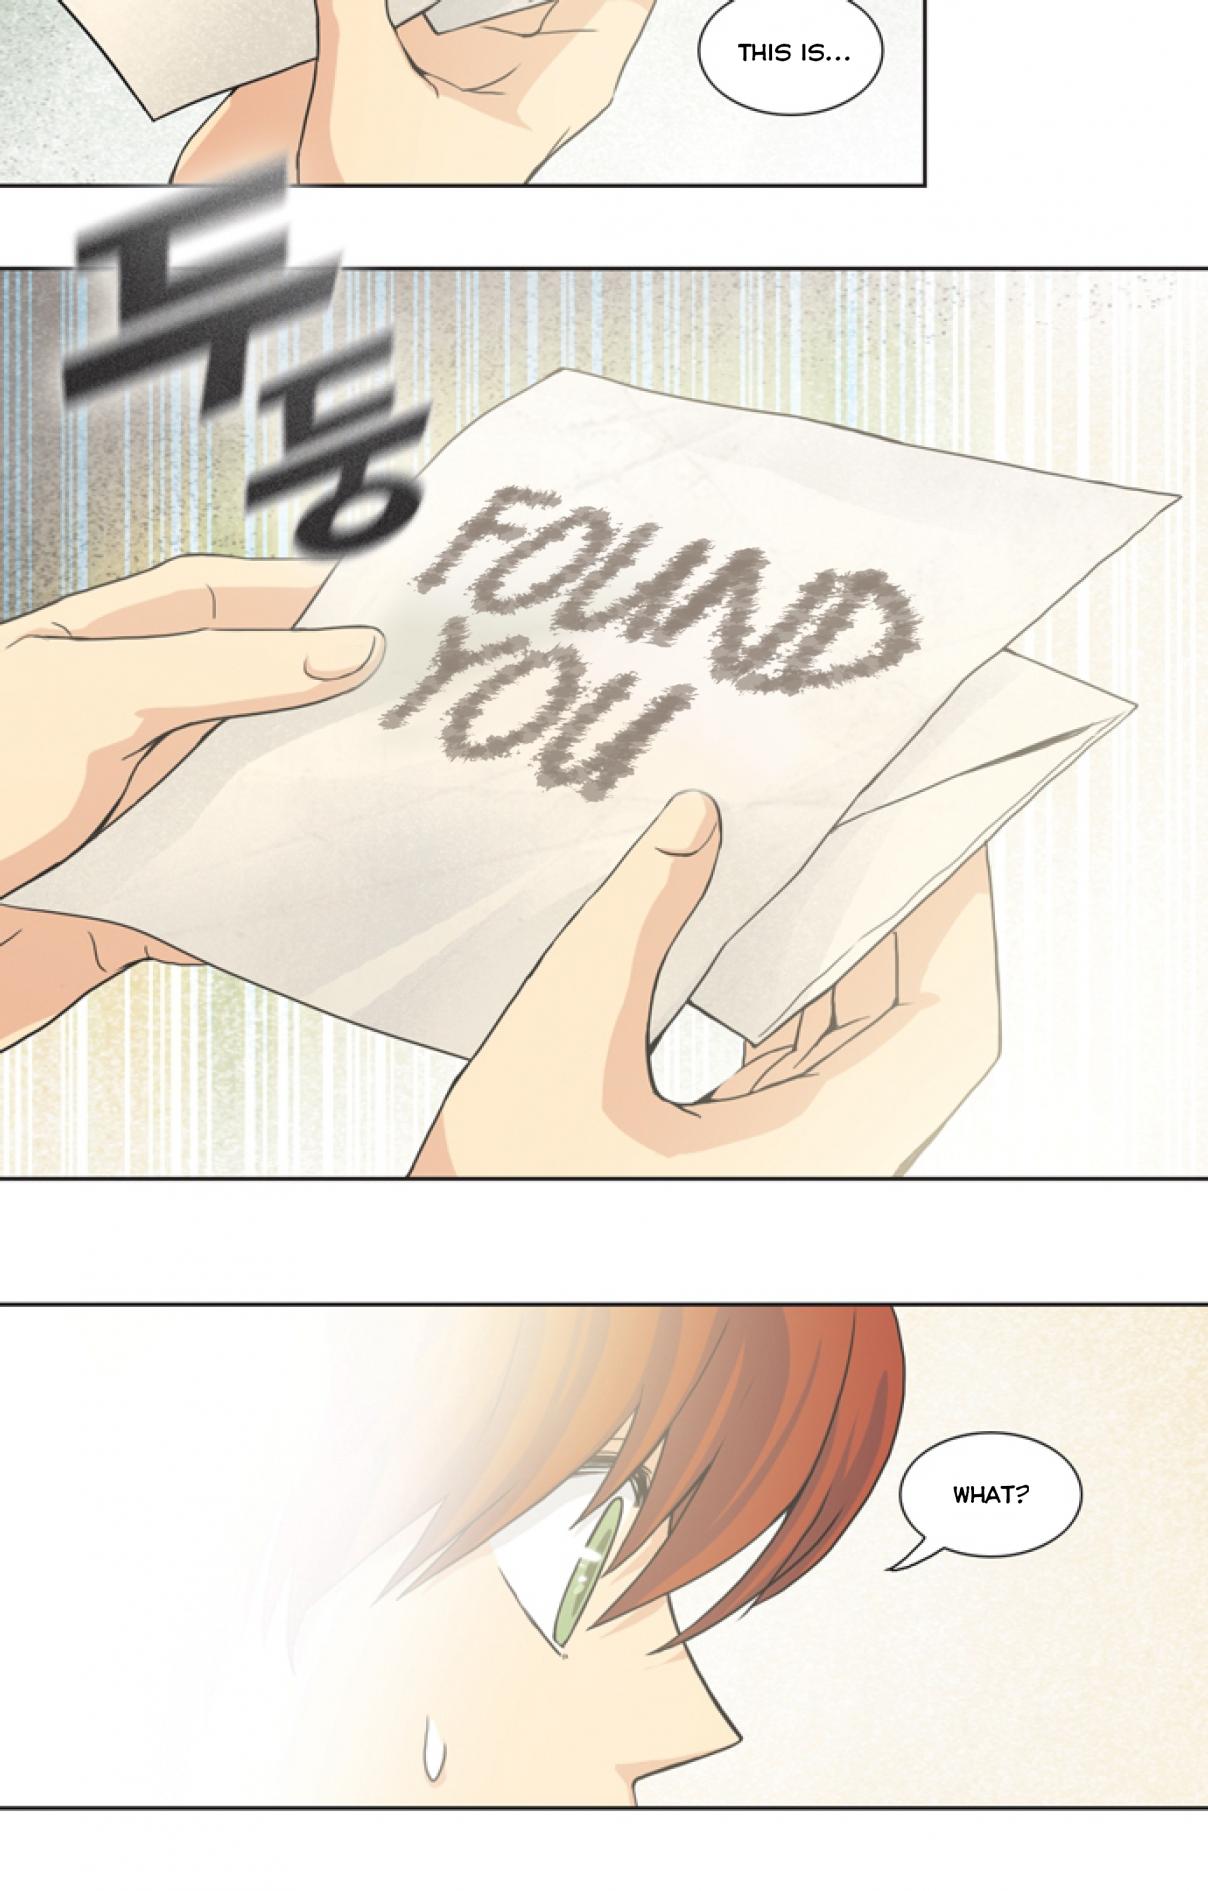 The Lady Project Vol. 1 Ch. 4 Lady and the Lucky Letter